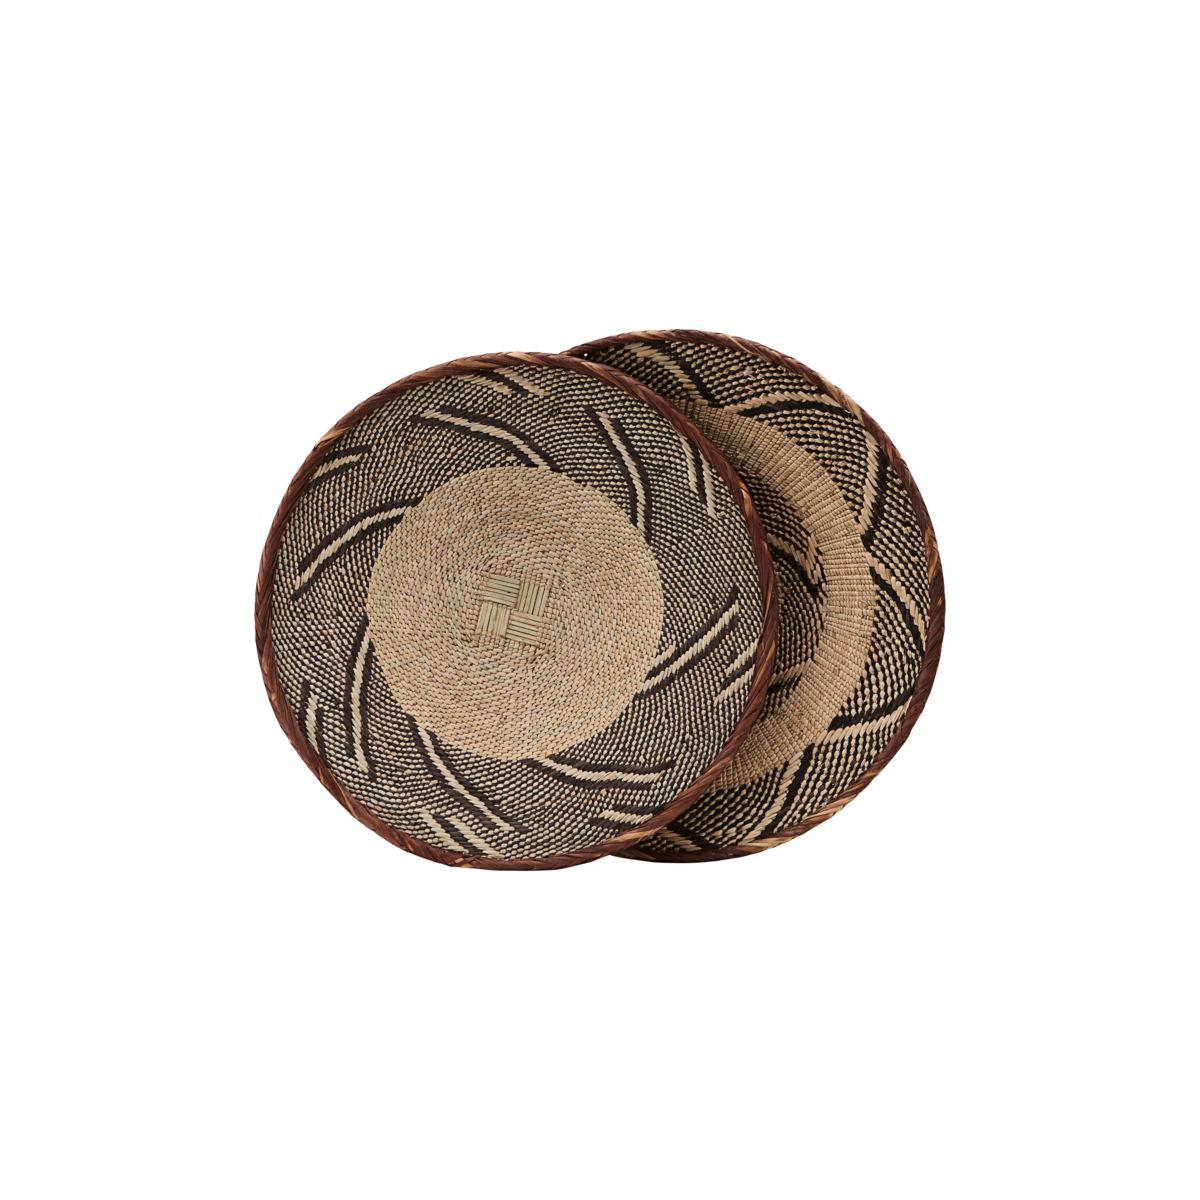 Decorative Shallow Hand Woven Basket in Small